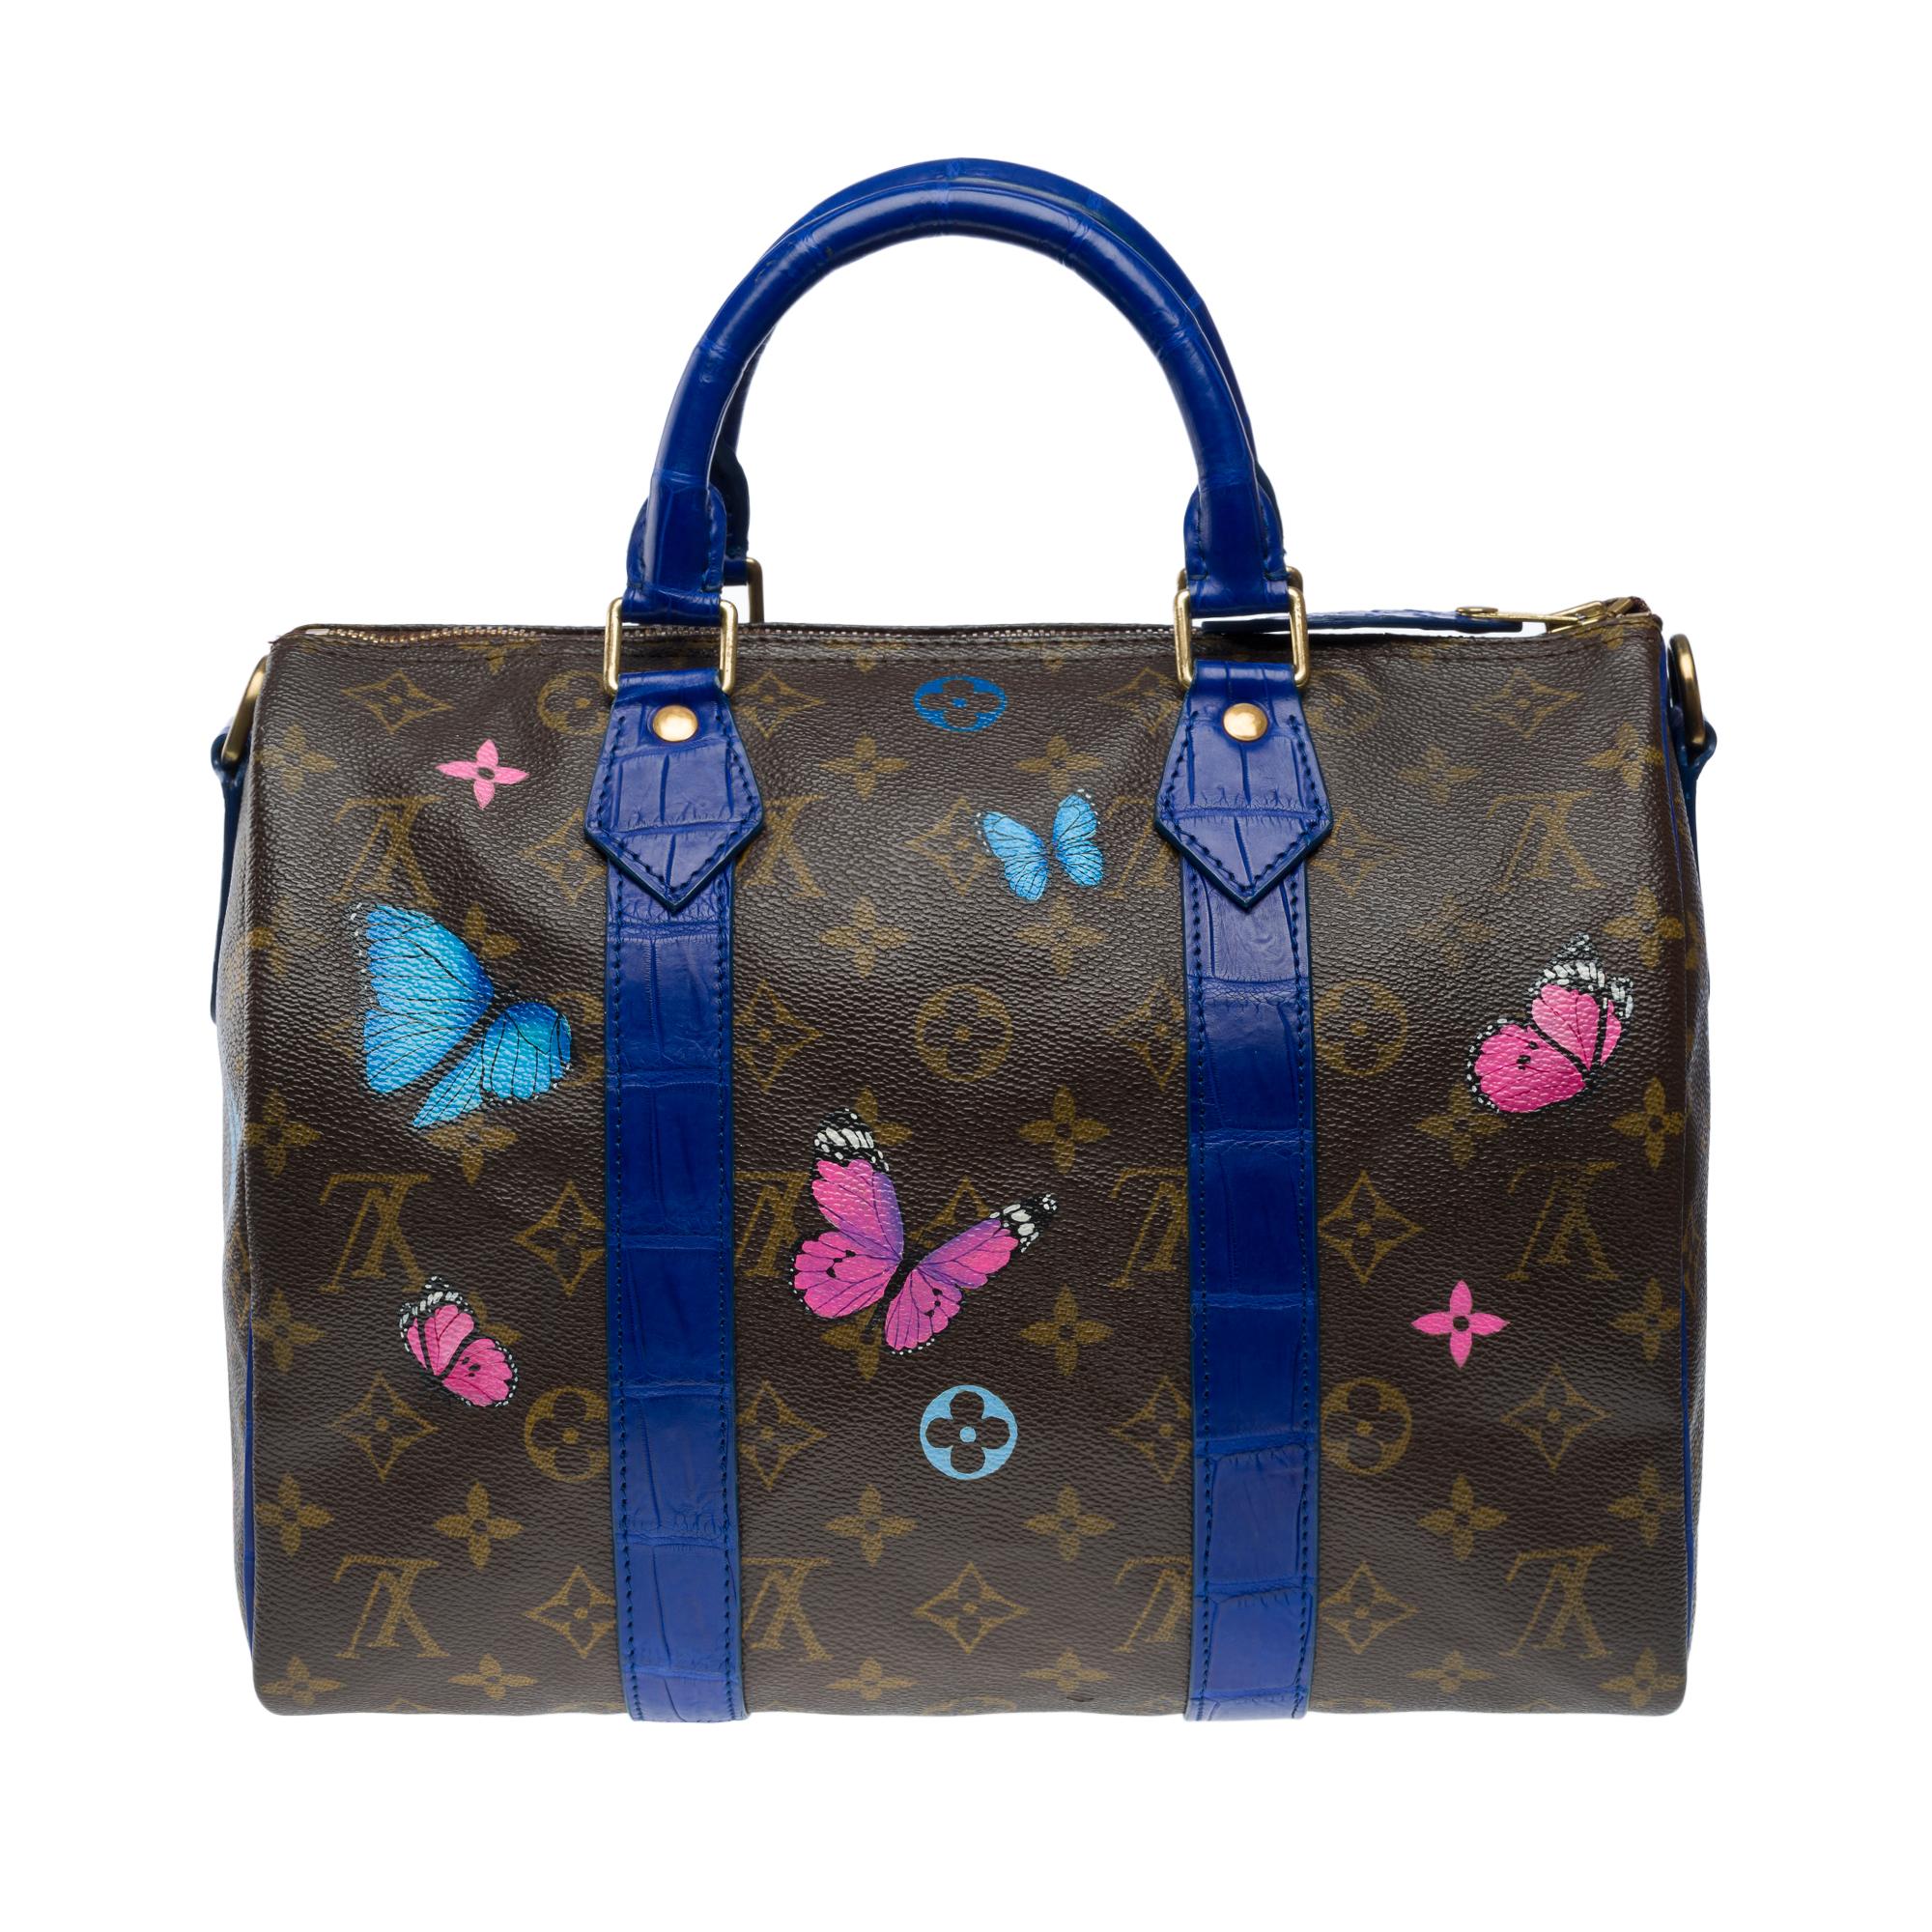 Customized Louis Vuitton Speedy 30 handbag Butterfly with Blue Crocodile leather In Good Condition For Sale In Paris, IDF